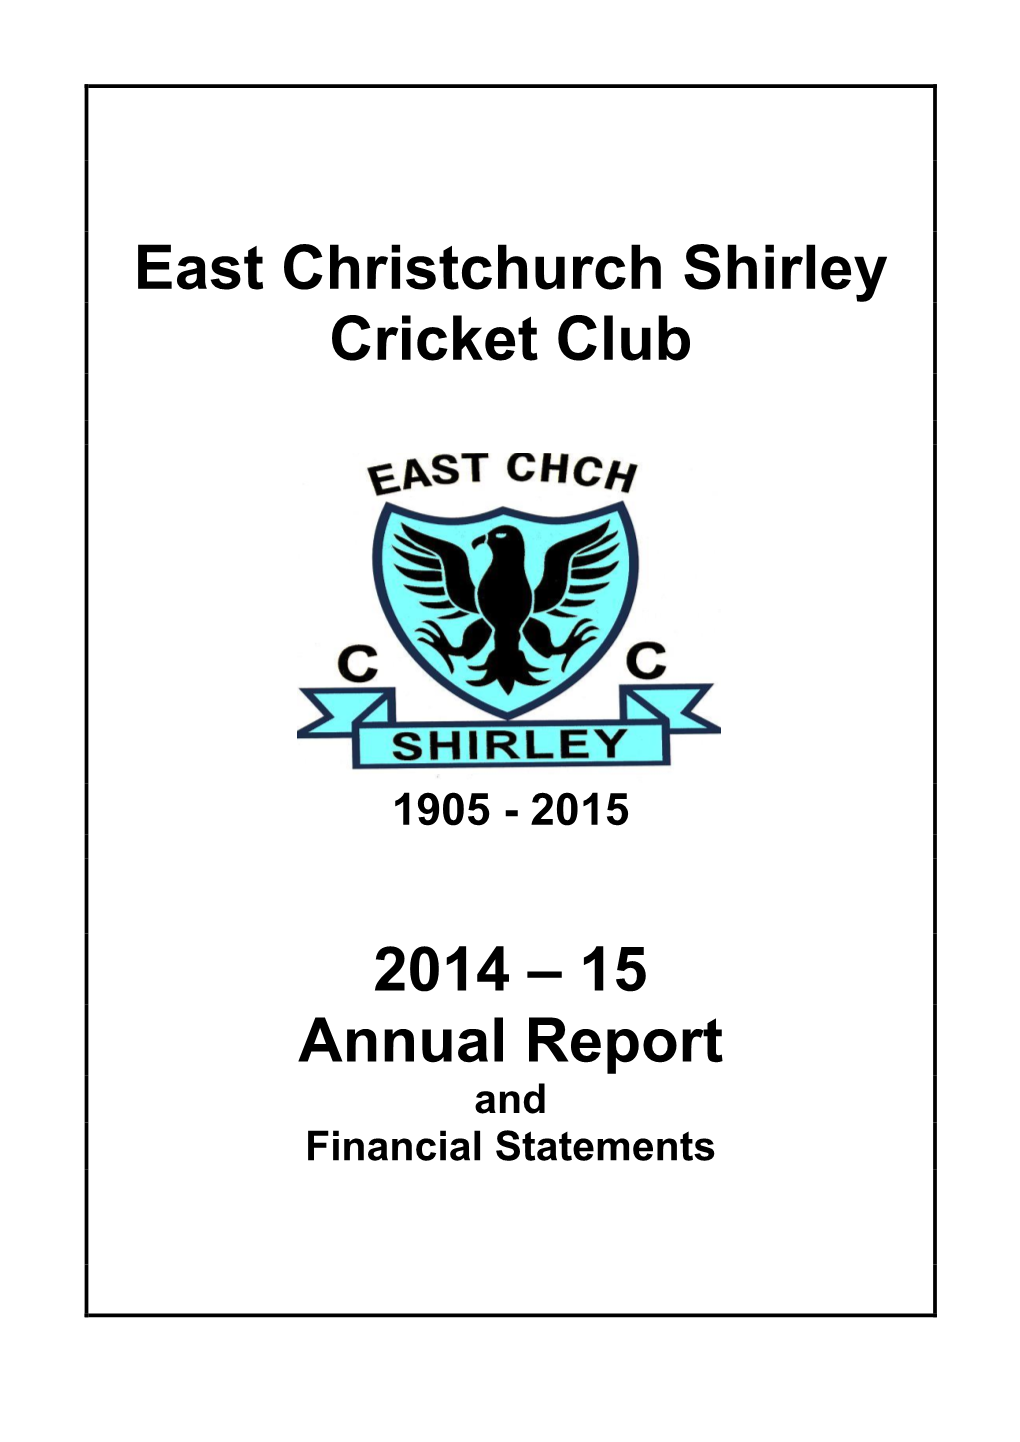 15 Annual Report and Financial Statements